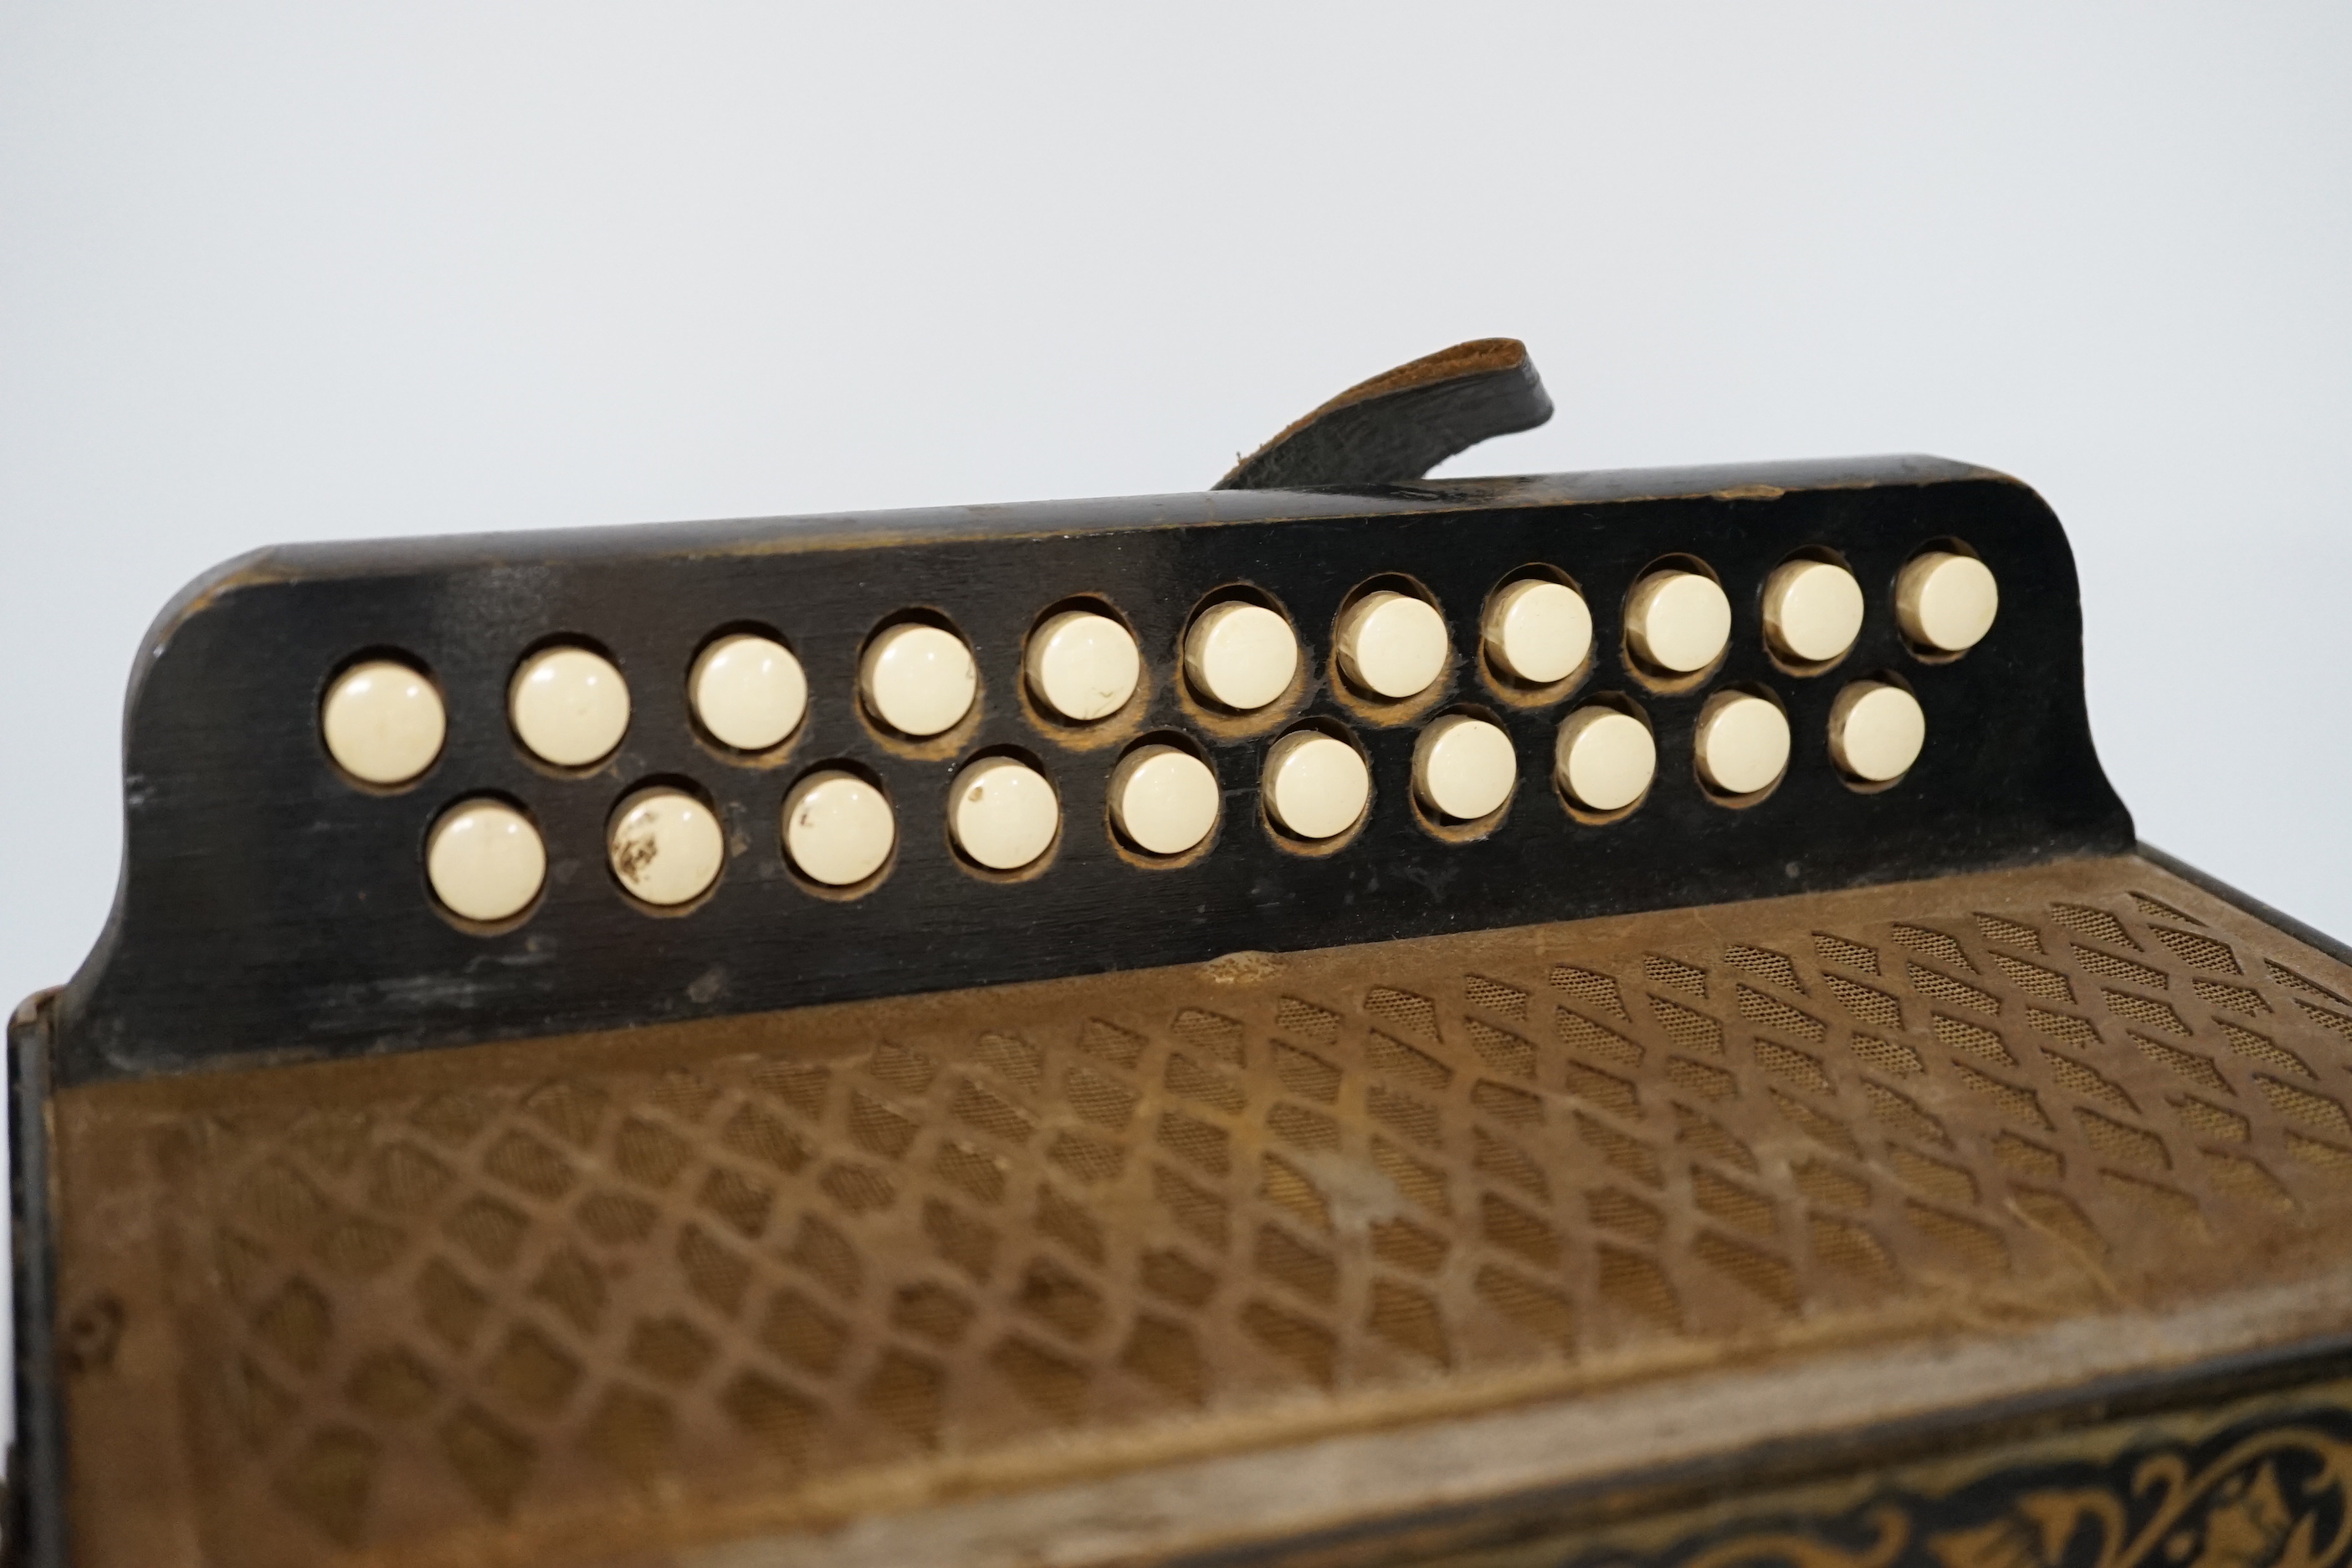 A Hohner accordion with Bakelite buttons